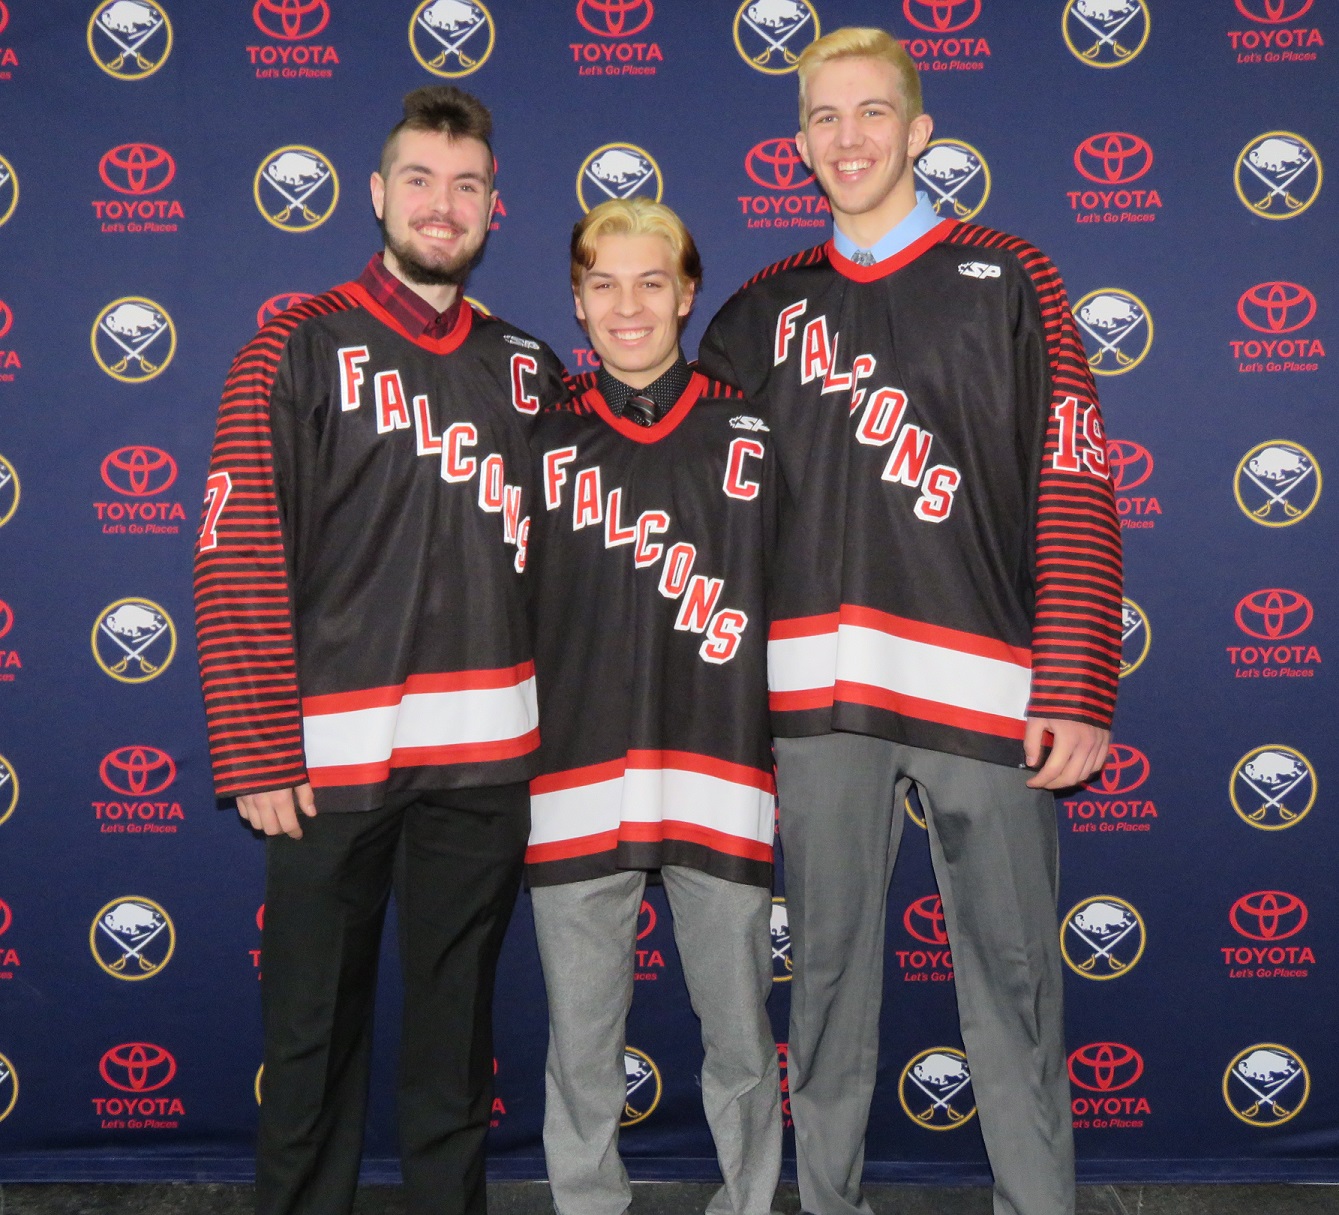 From left to right: Chris Tobey, Nick Peters and Zack Belter pose for a picture during Friday morning's Section VI hockey press conference. The three have played for the Niagara-Wheatfield Falcons hockey team since they were freshman. (Photo by David Yarger)